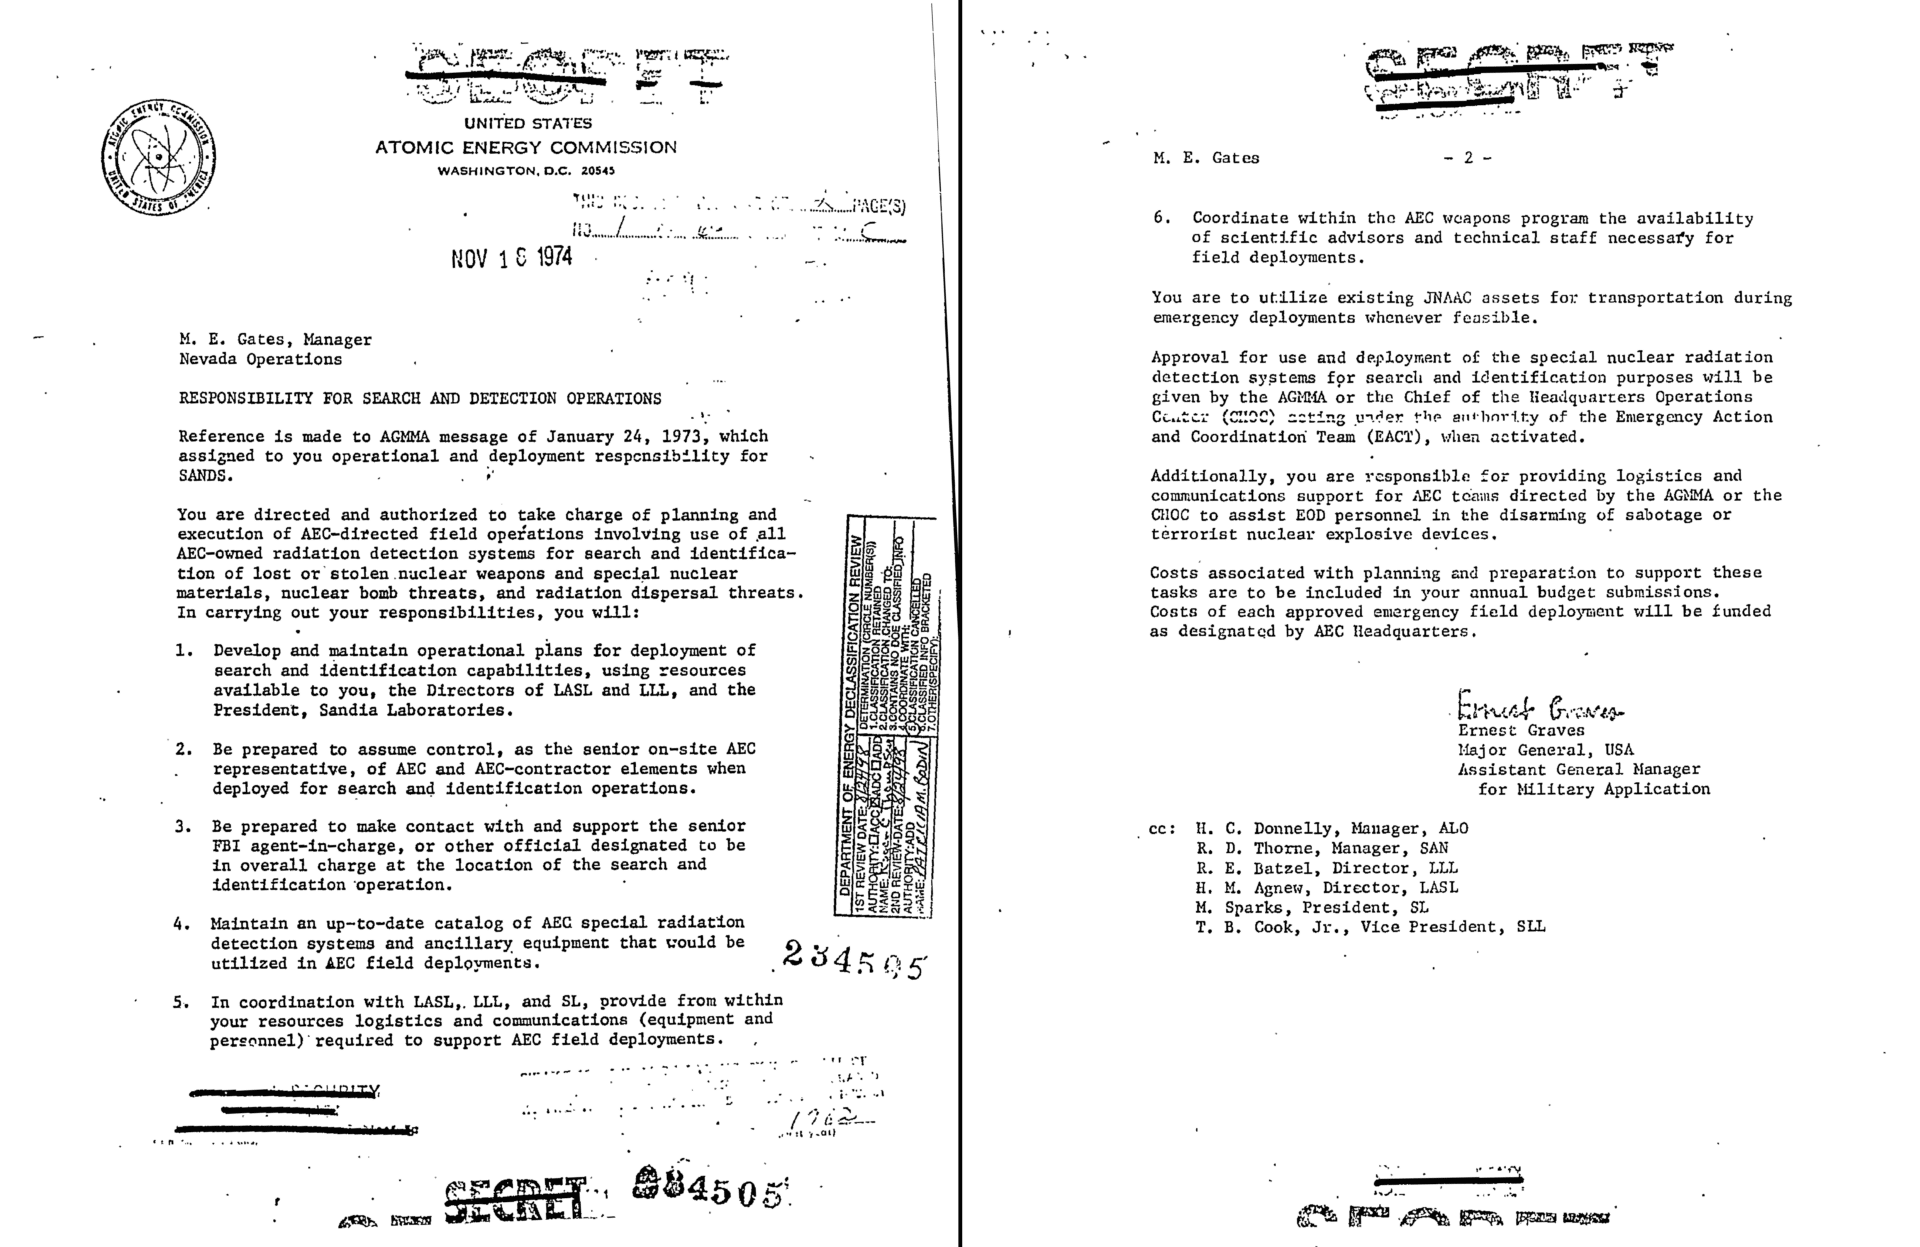 This November 18, 1974, memo from General Graves assigns Gates and the AEC’s Nevada Operations Office responsibility for search and detection operations with respect to lost and stolen nuclear weapons and special nuclear material, as well as  responding to nuclear bomb and radiation dispersal threats. It specifies six ways in which Gates and the NOO is to carry out those responsibilities. The memo became the basis for the creation of the Nuclear Emergency Search Team. (<a href="https://nsarchive2.gwu.edu/nukevault/ebb267/06.pdf">National Security Archive</a>)